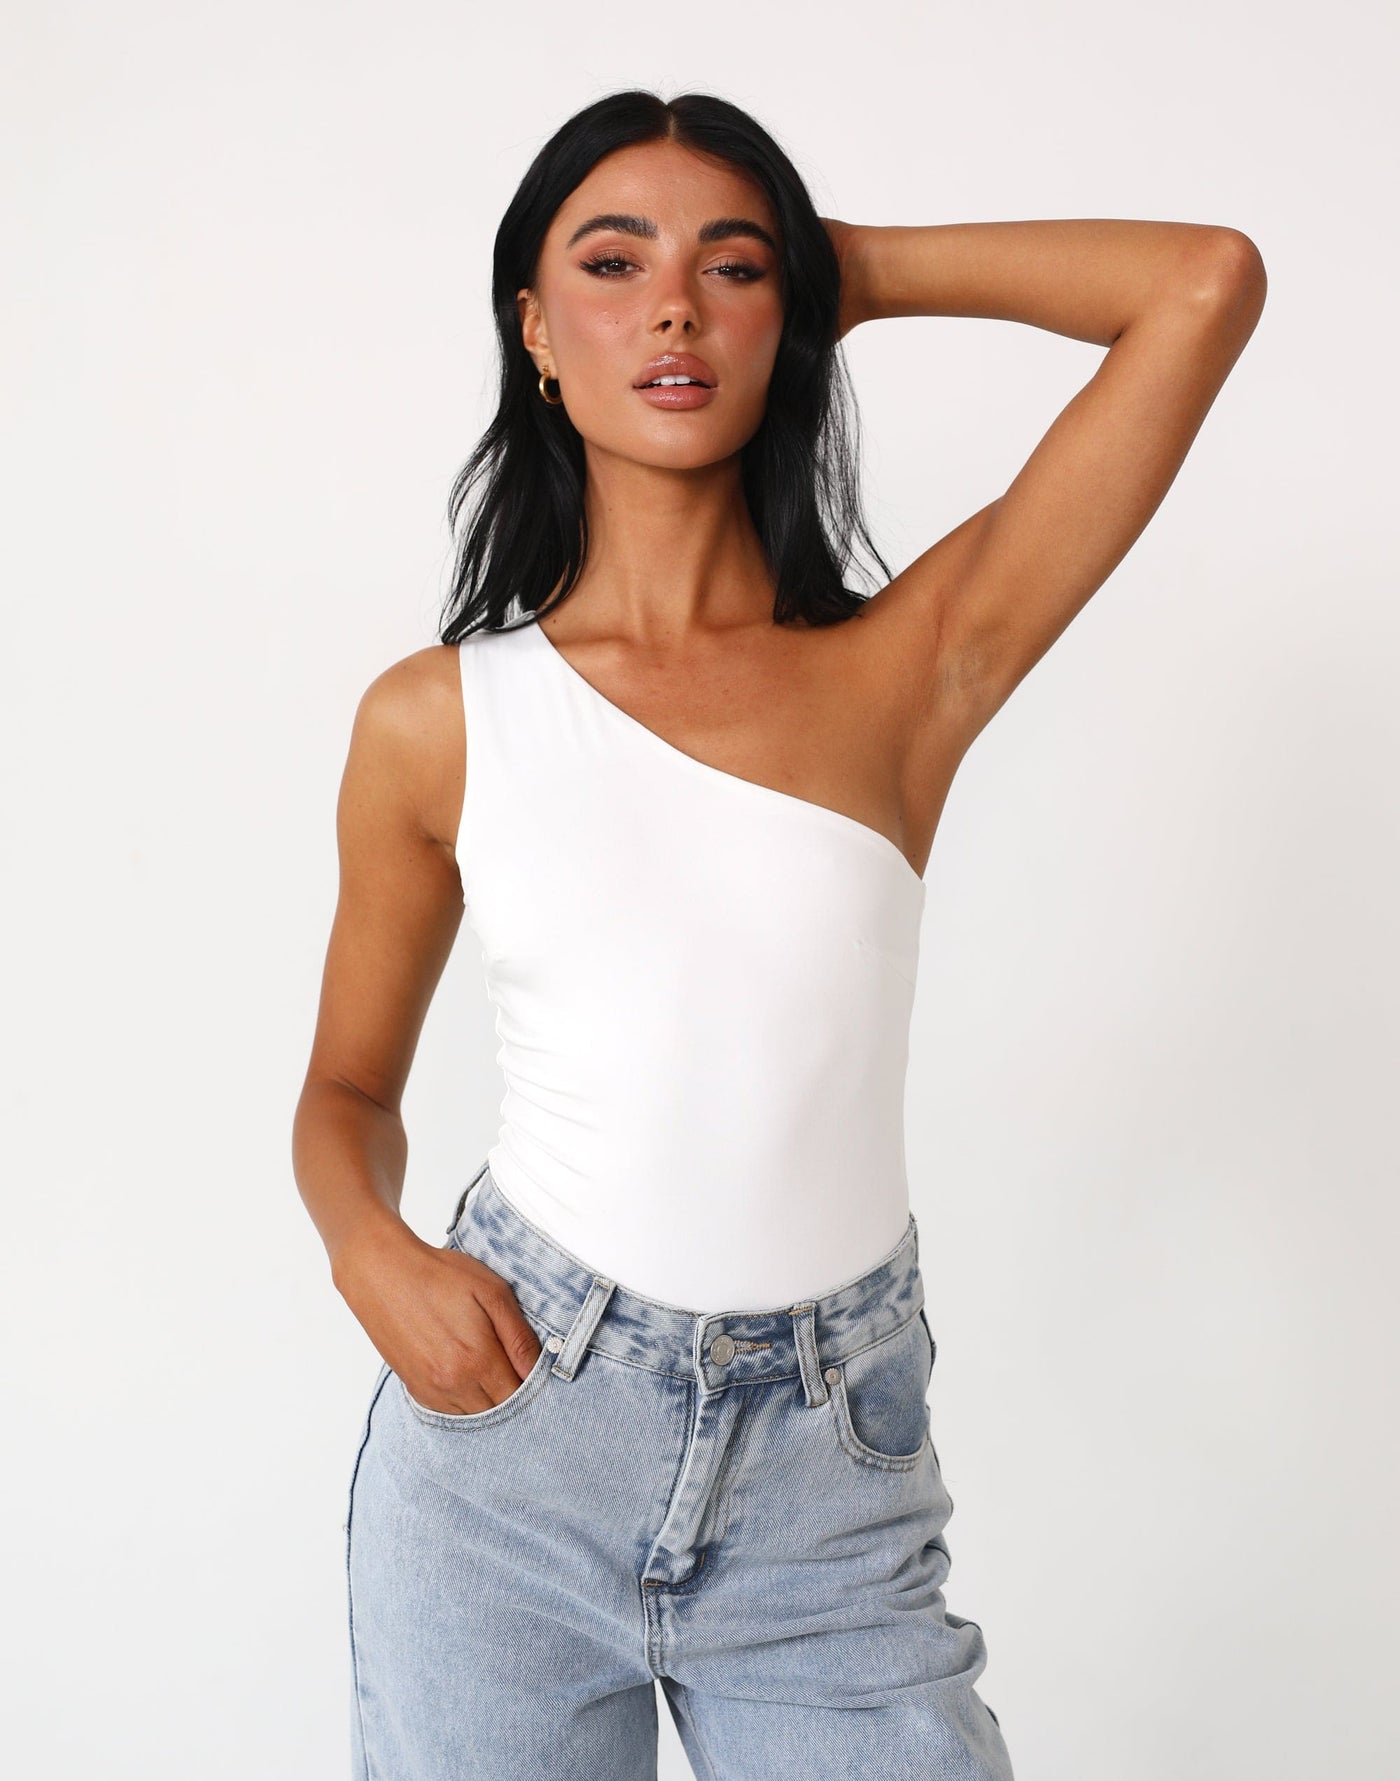 Lights Out Bodysuit (White) - White Asymmetrical Fitted Bodysuit - Women's Top - Charcoal Clothing